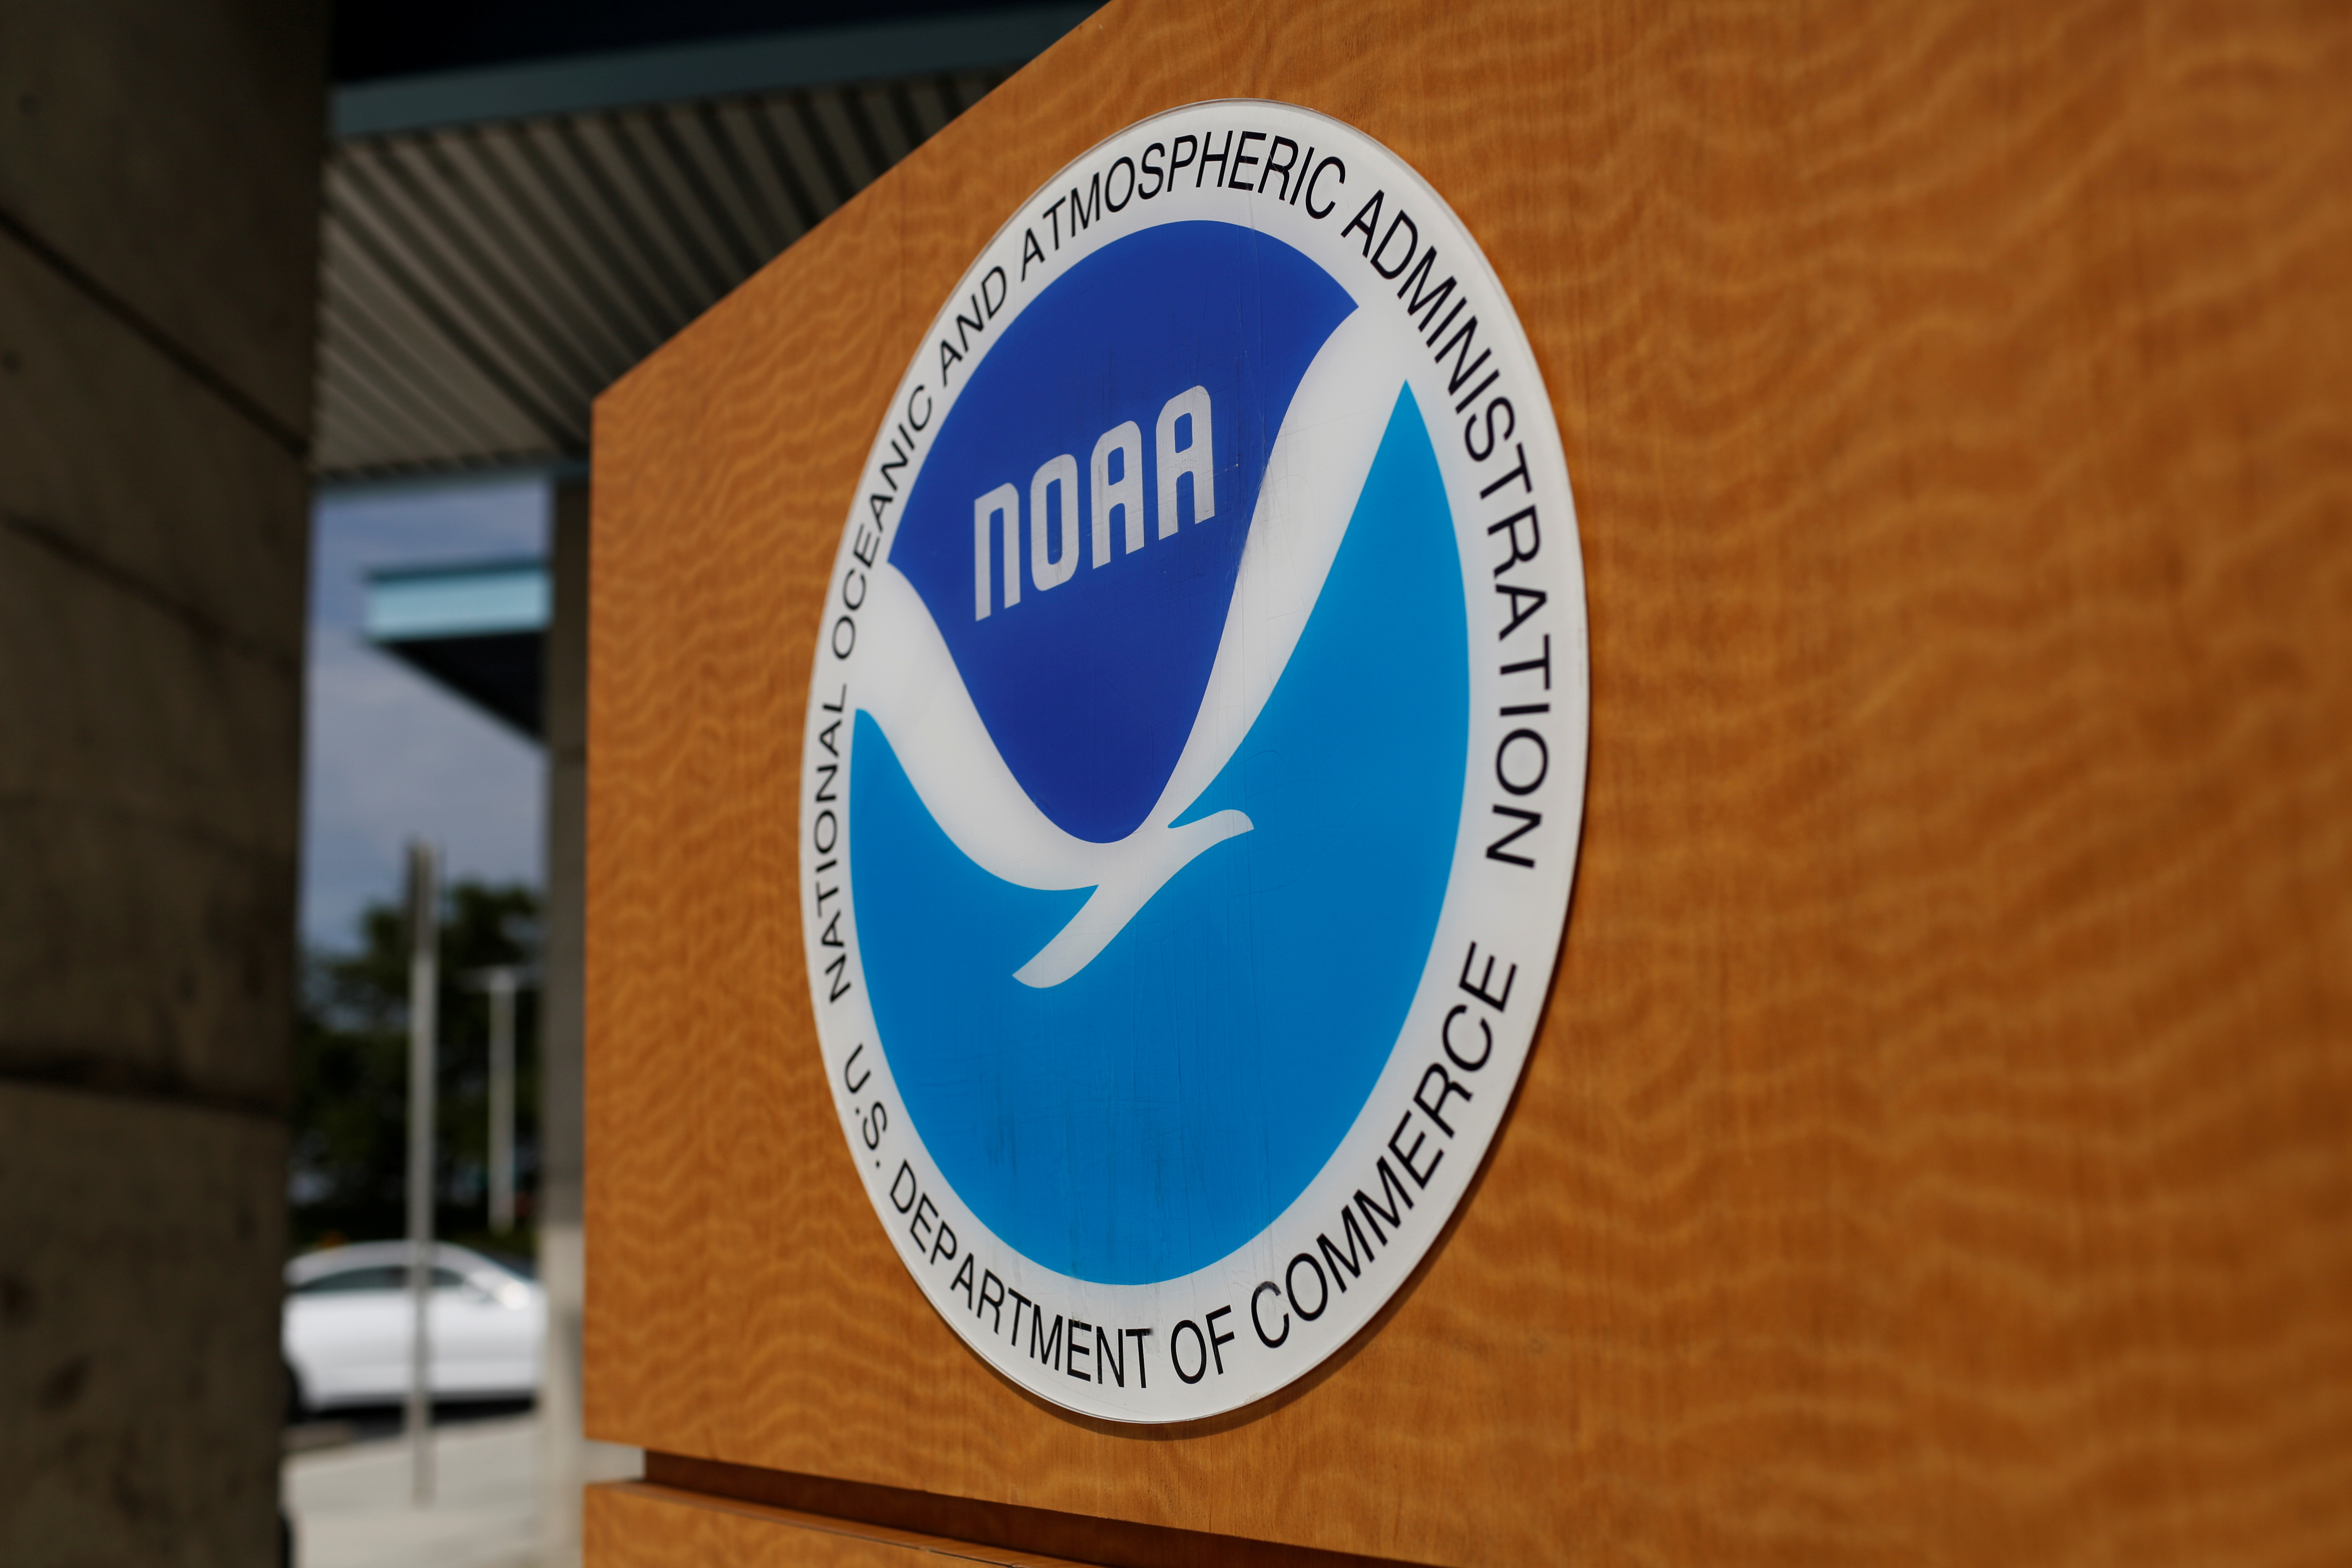 The logo of the National Oceanic and Atmospheric Administration is seen at the National Hurricane Center in Miami